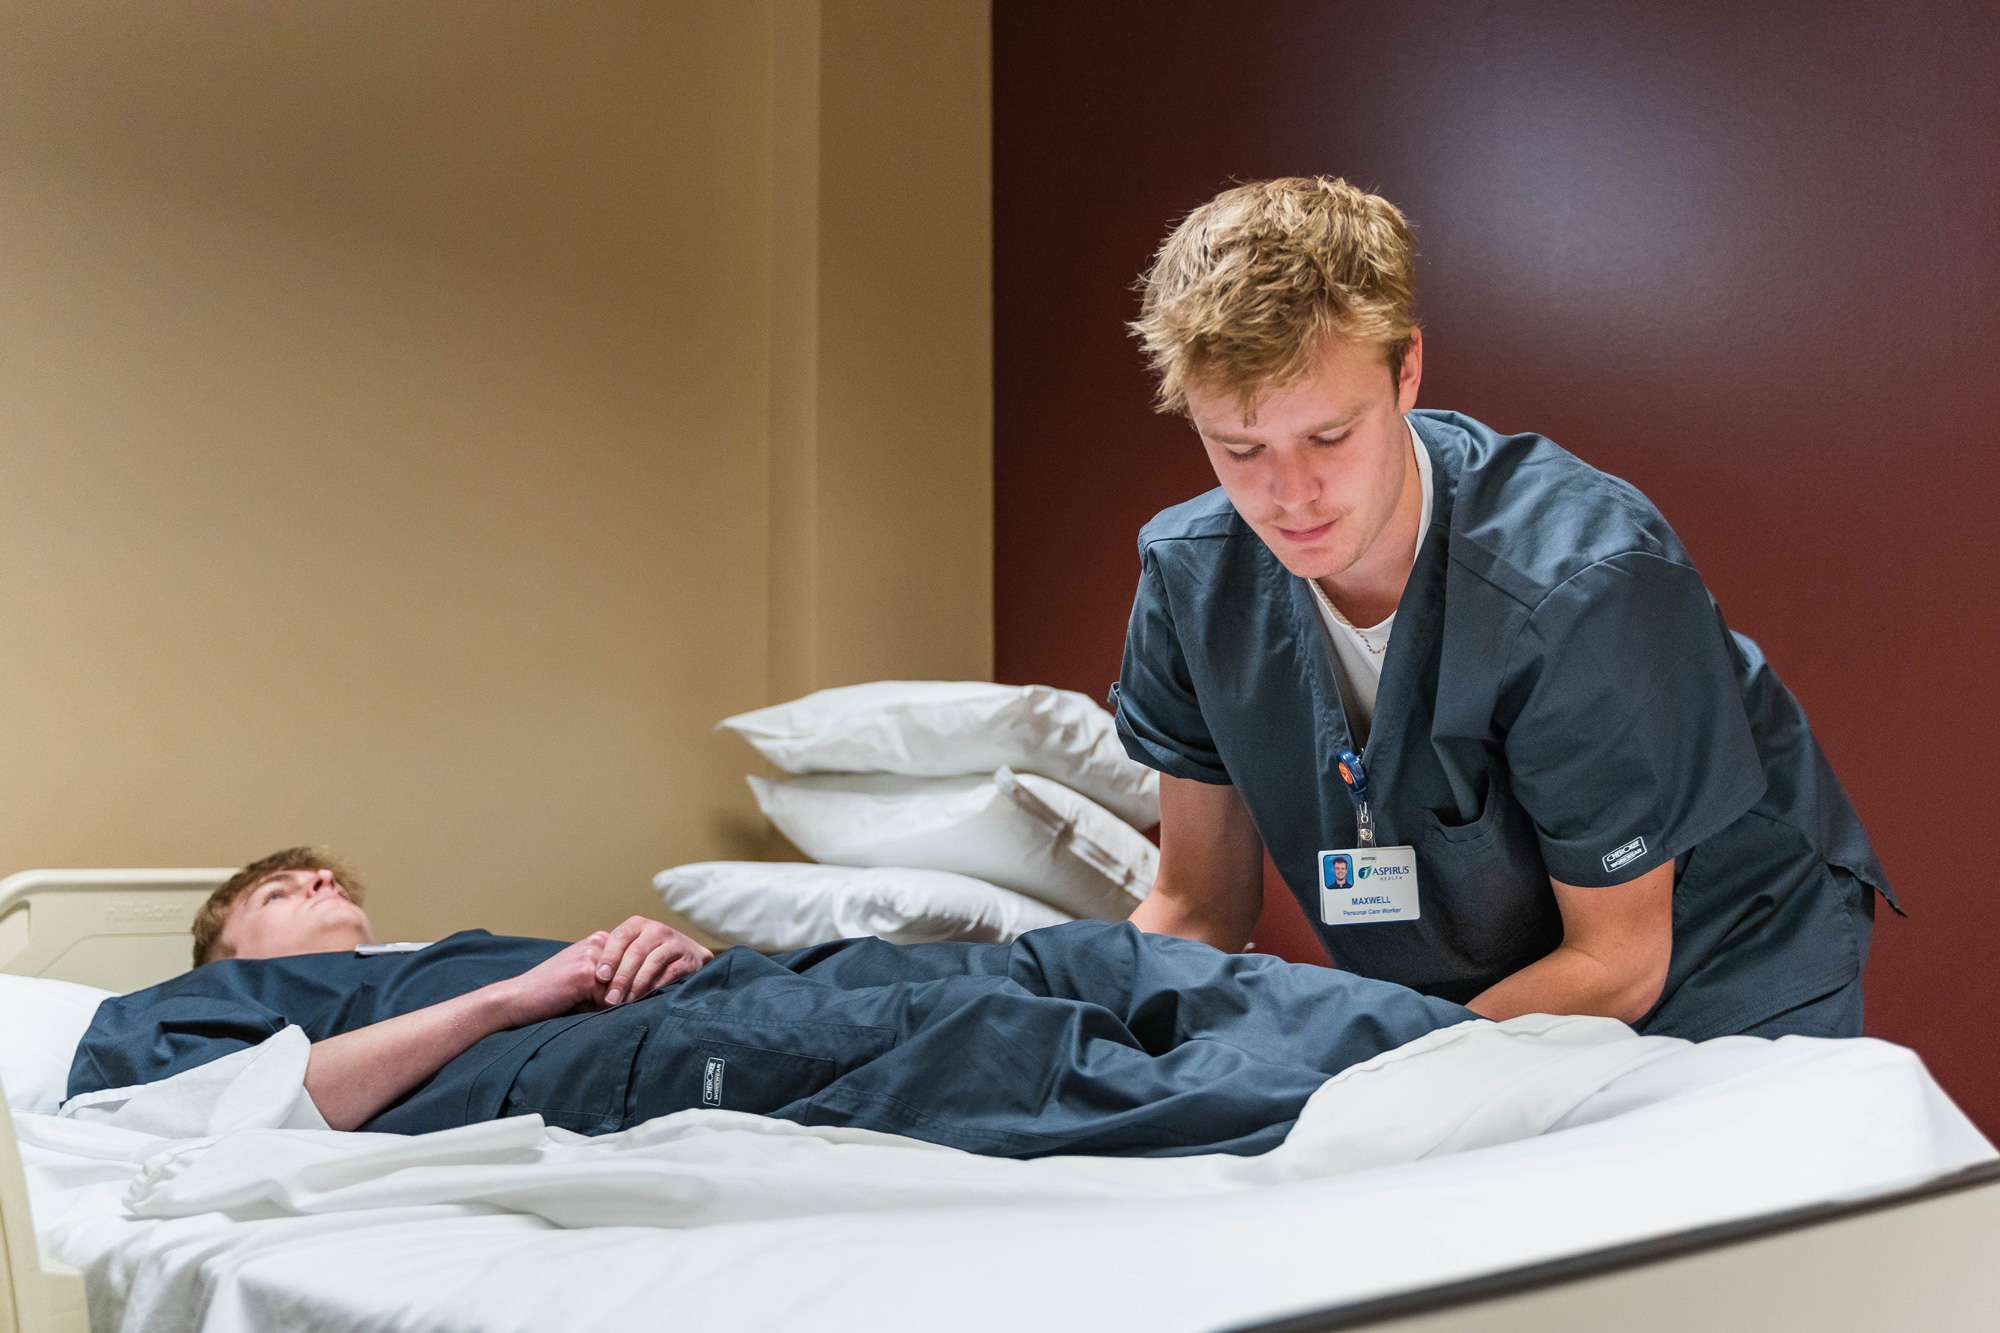 A Nursing Assistant is repositioning a patient on a hospital bed.